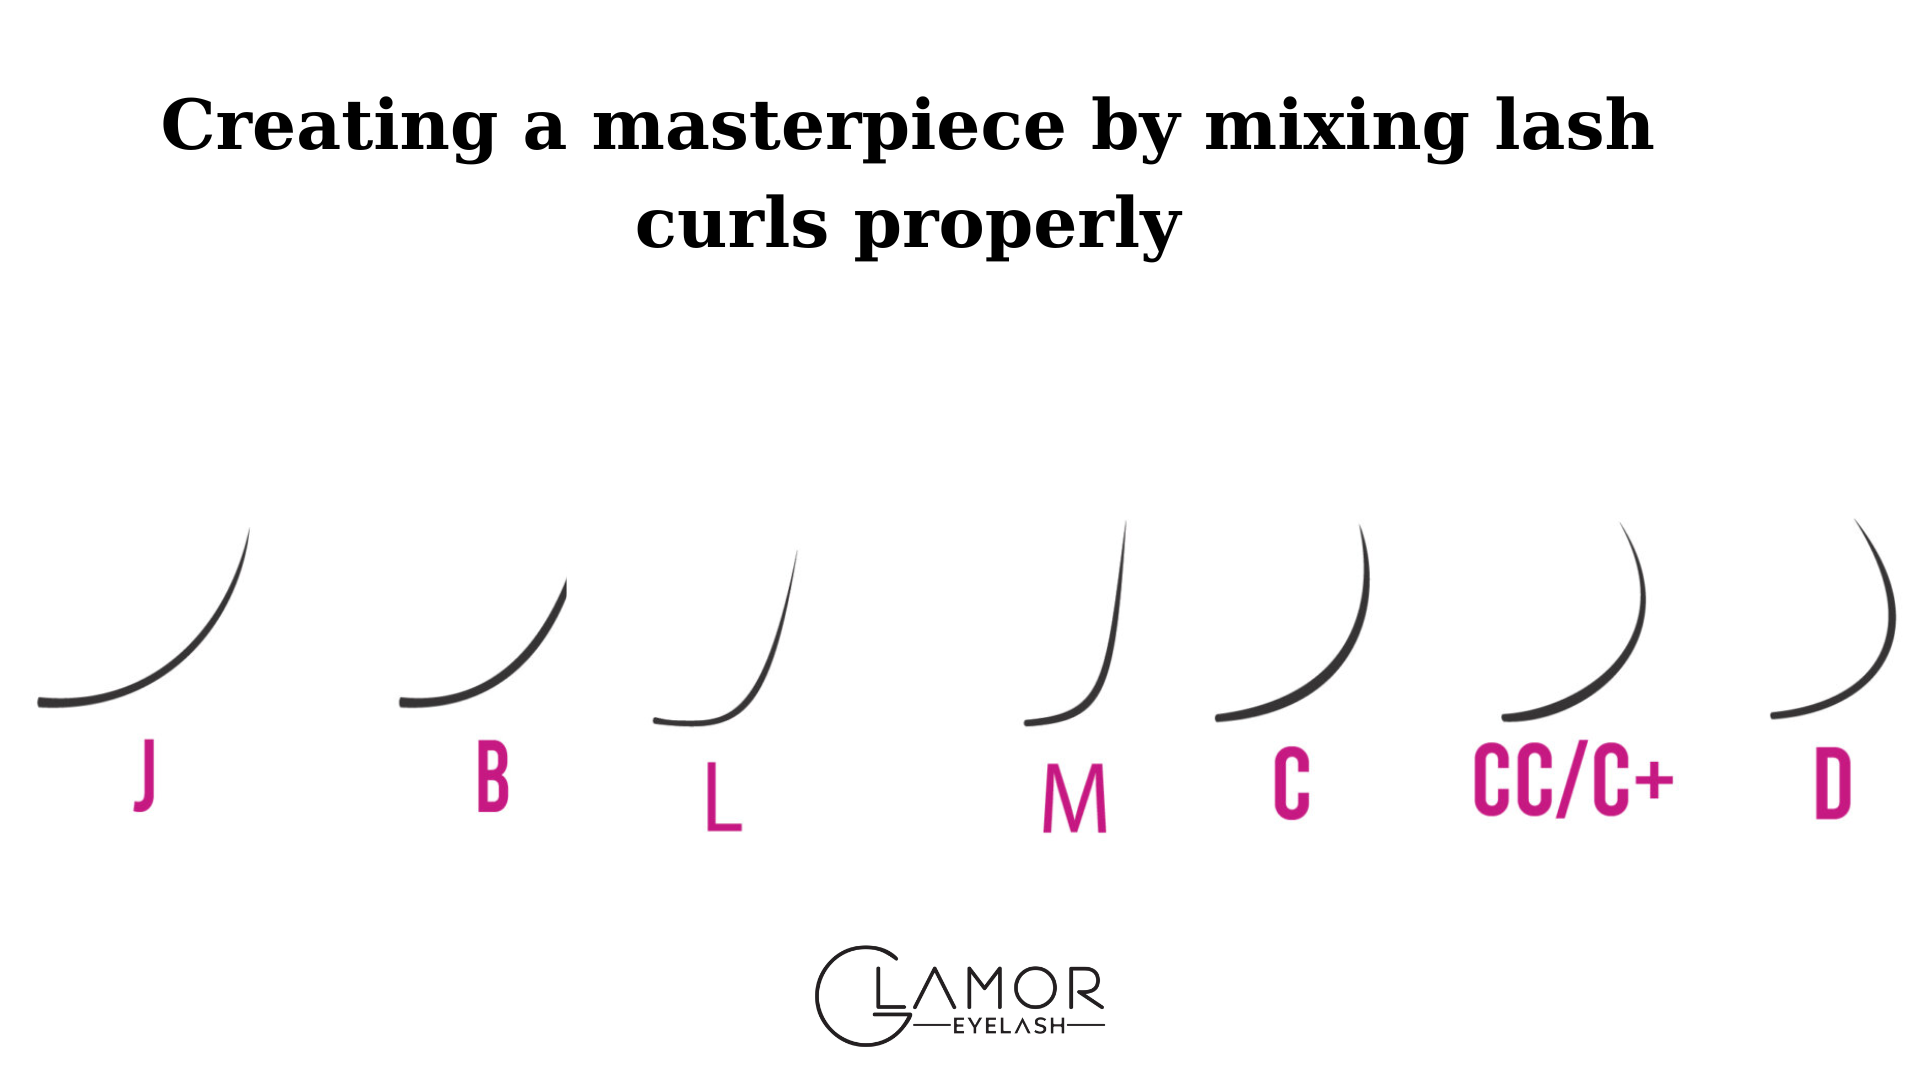 Creating a masterpiece by mixing lash curls properly